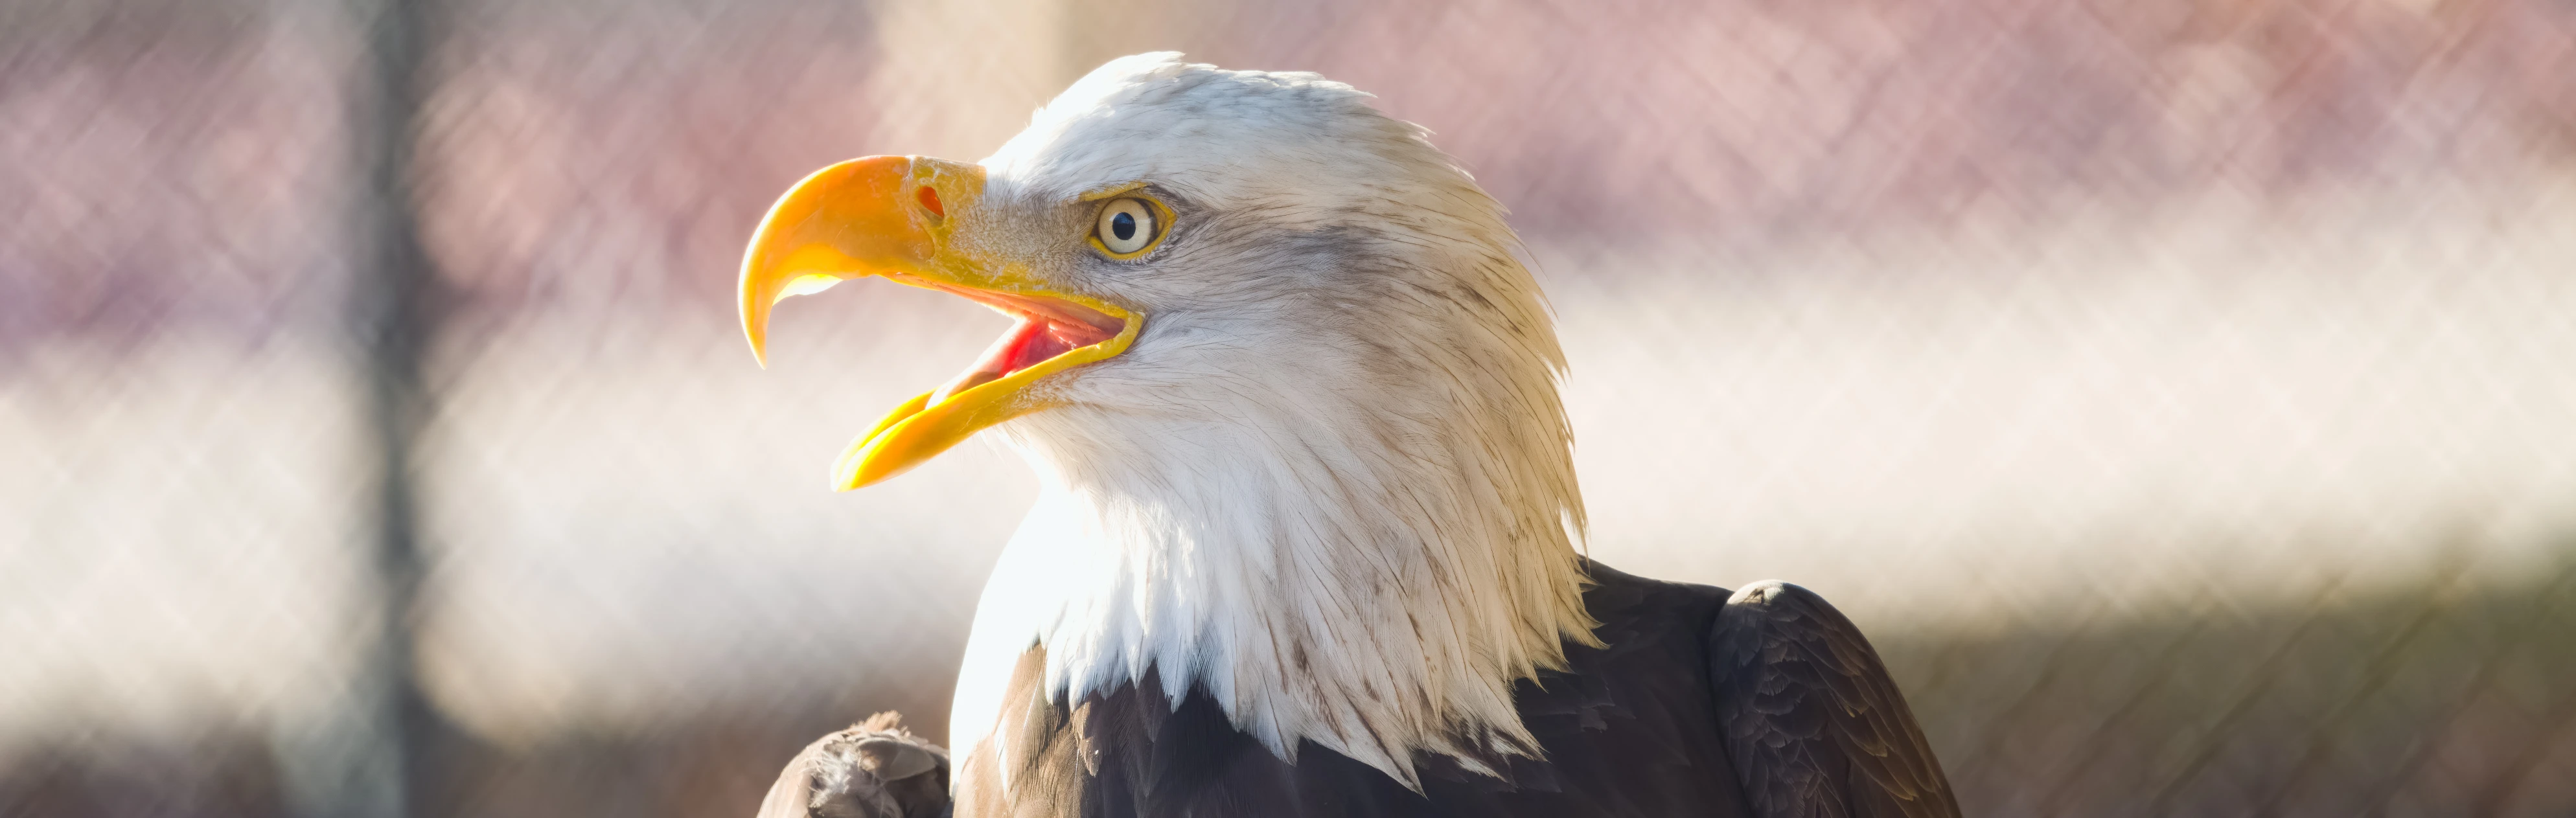 A Bald Eagle at the Phillips Park Zoo